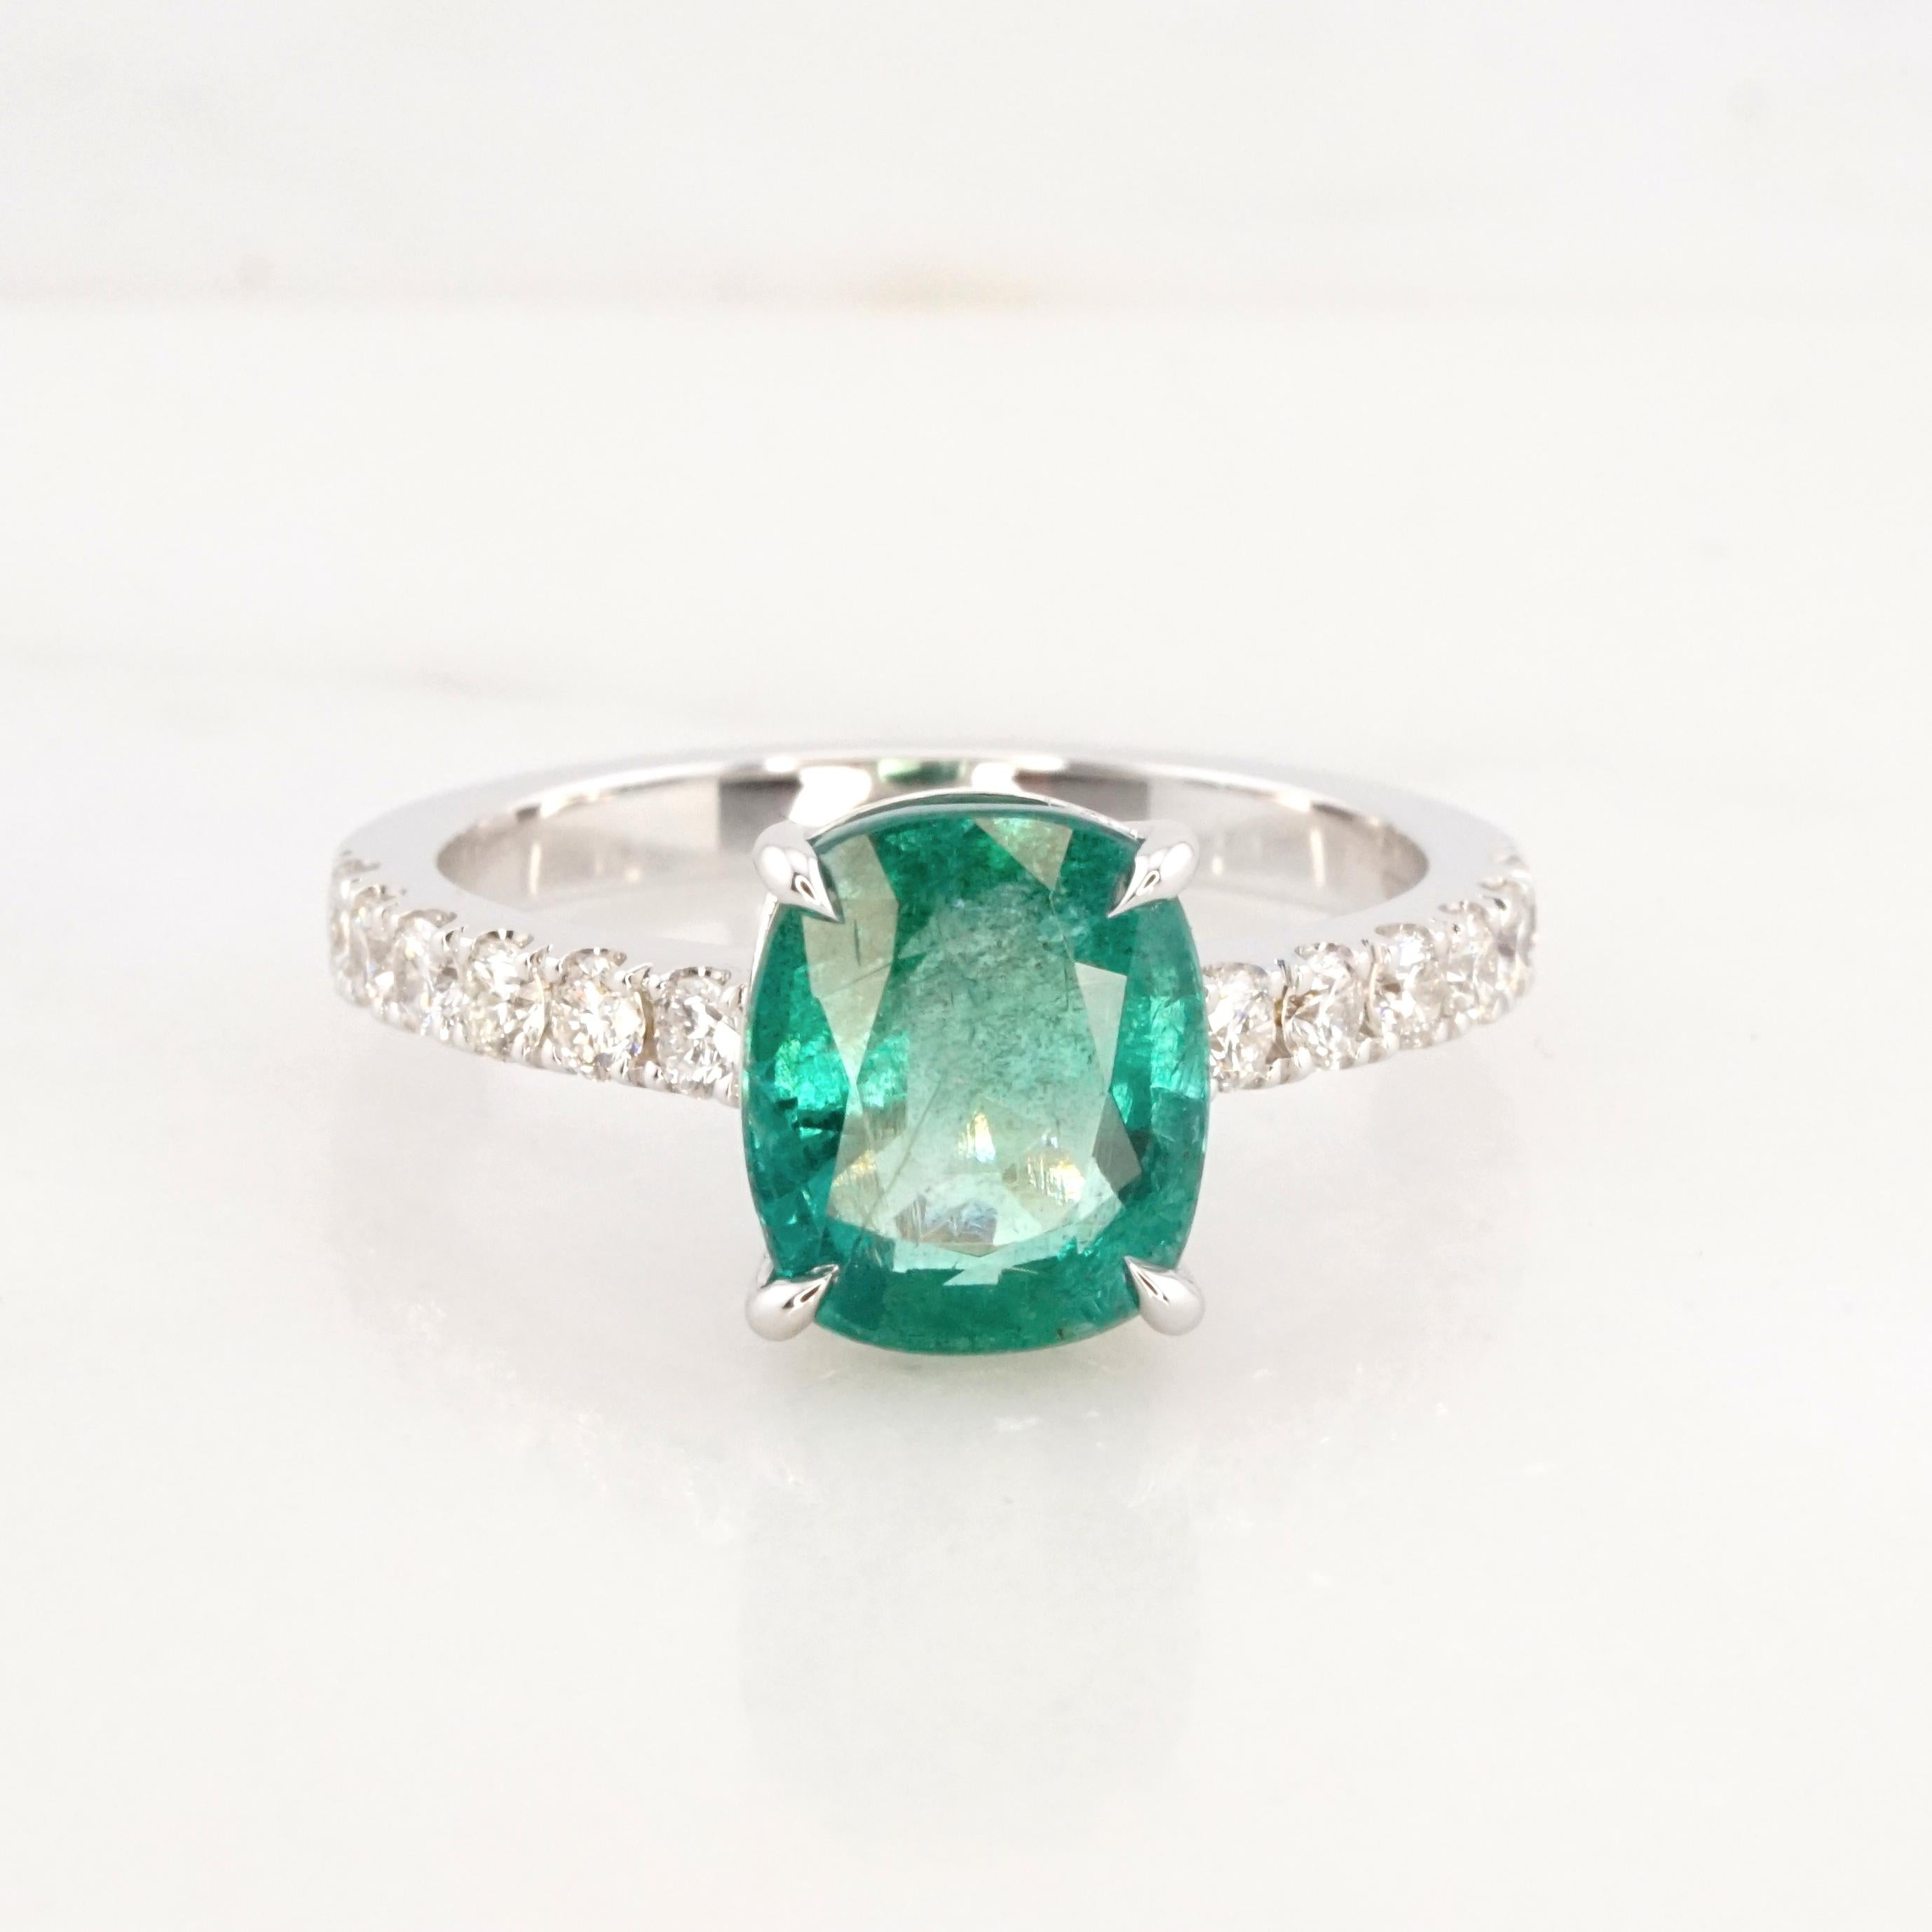 This exquisite cushion-cut emerald ring is a masterpiece of elegance and sophistication. At its heart lies a mesmerizing IGI Certified 3-carat natural emerald, boasting a vibrant, translucent green that captures the very essence of nature's